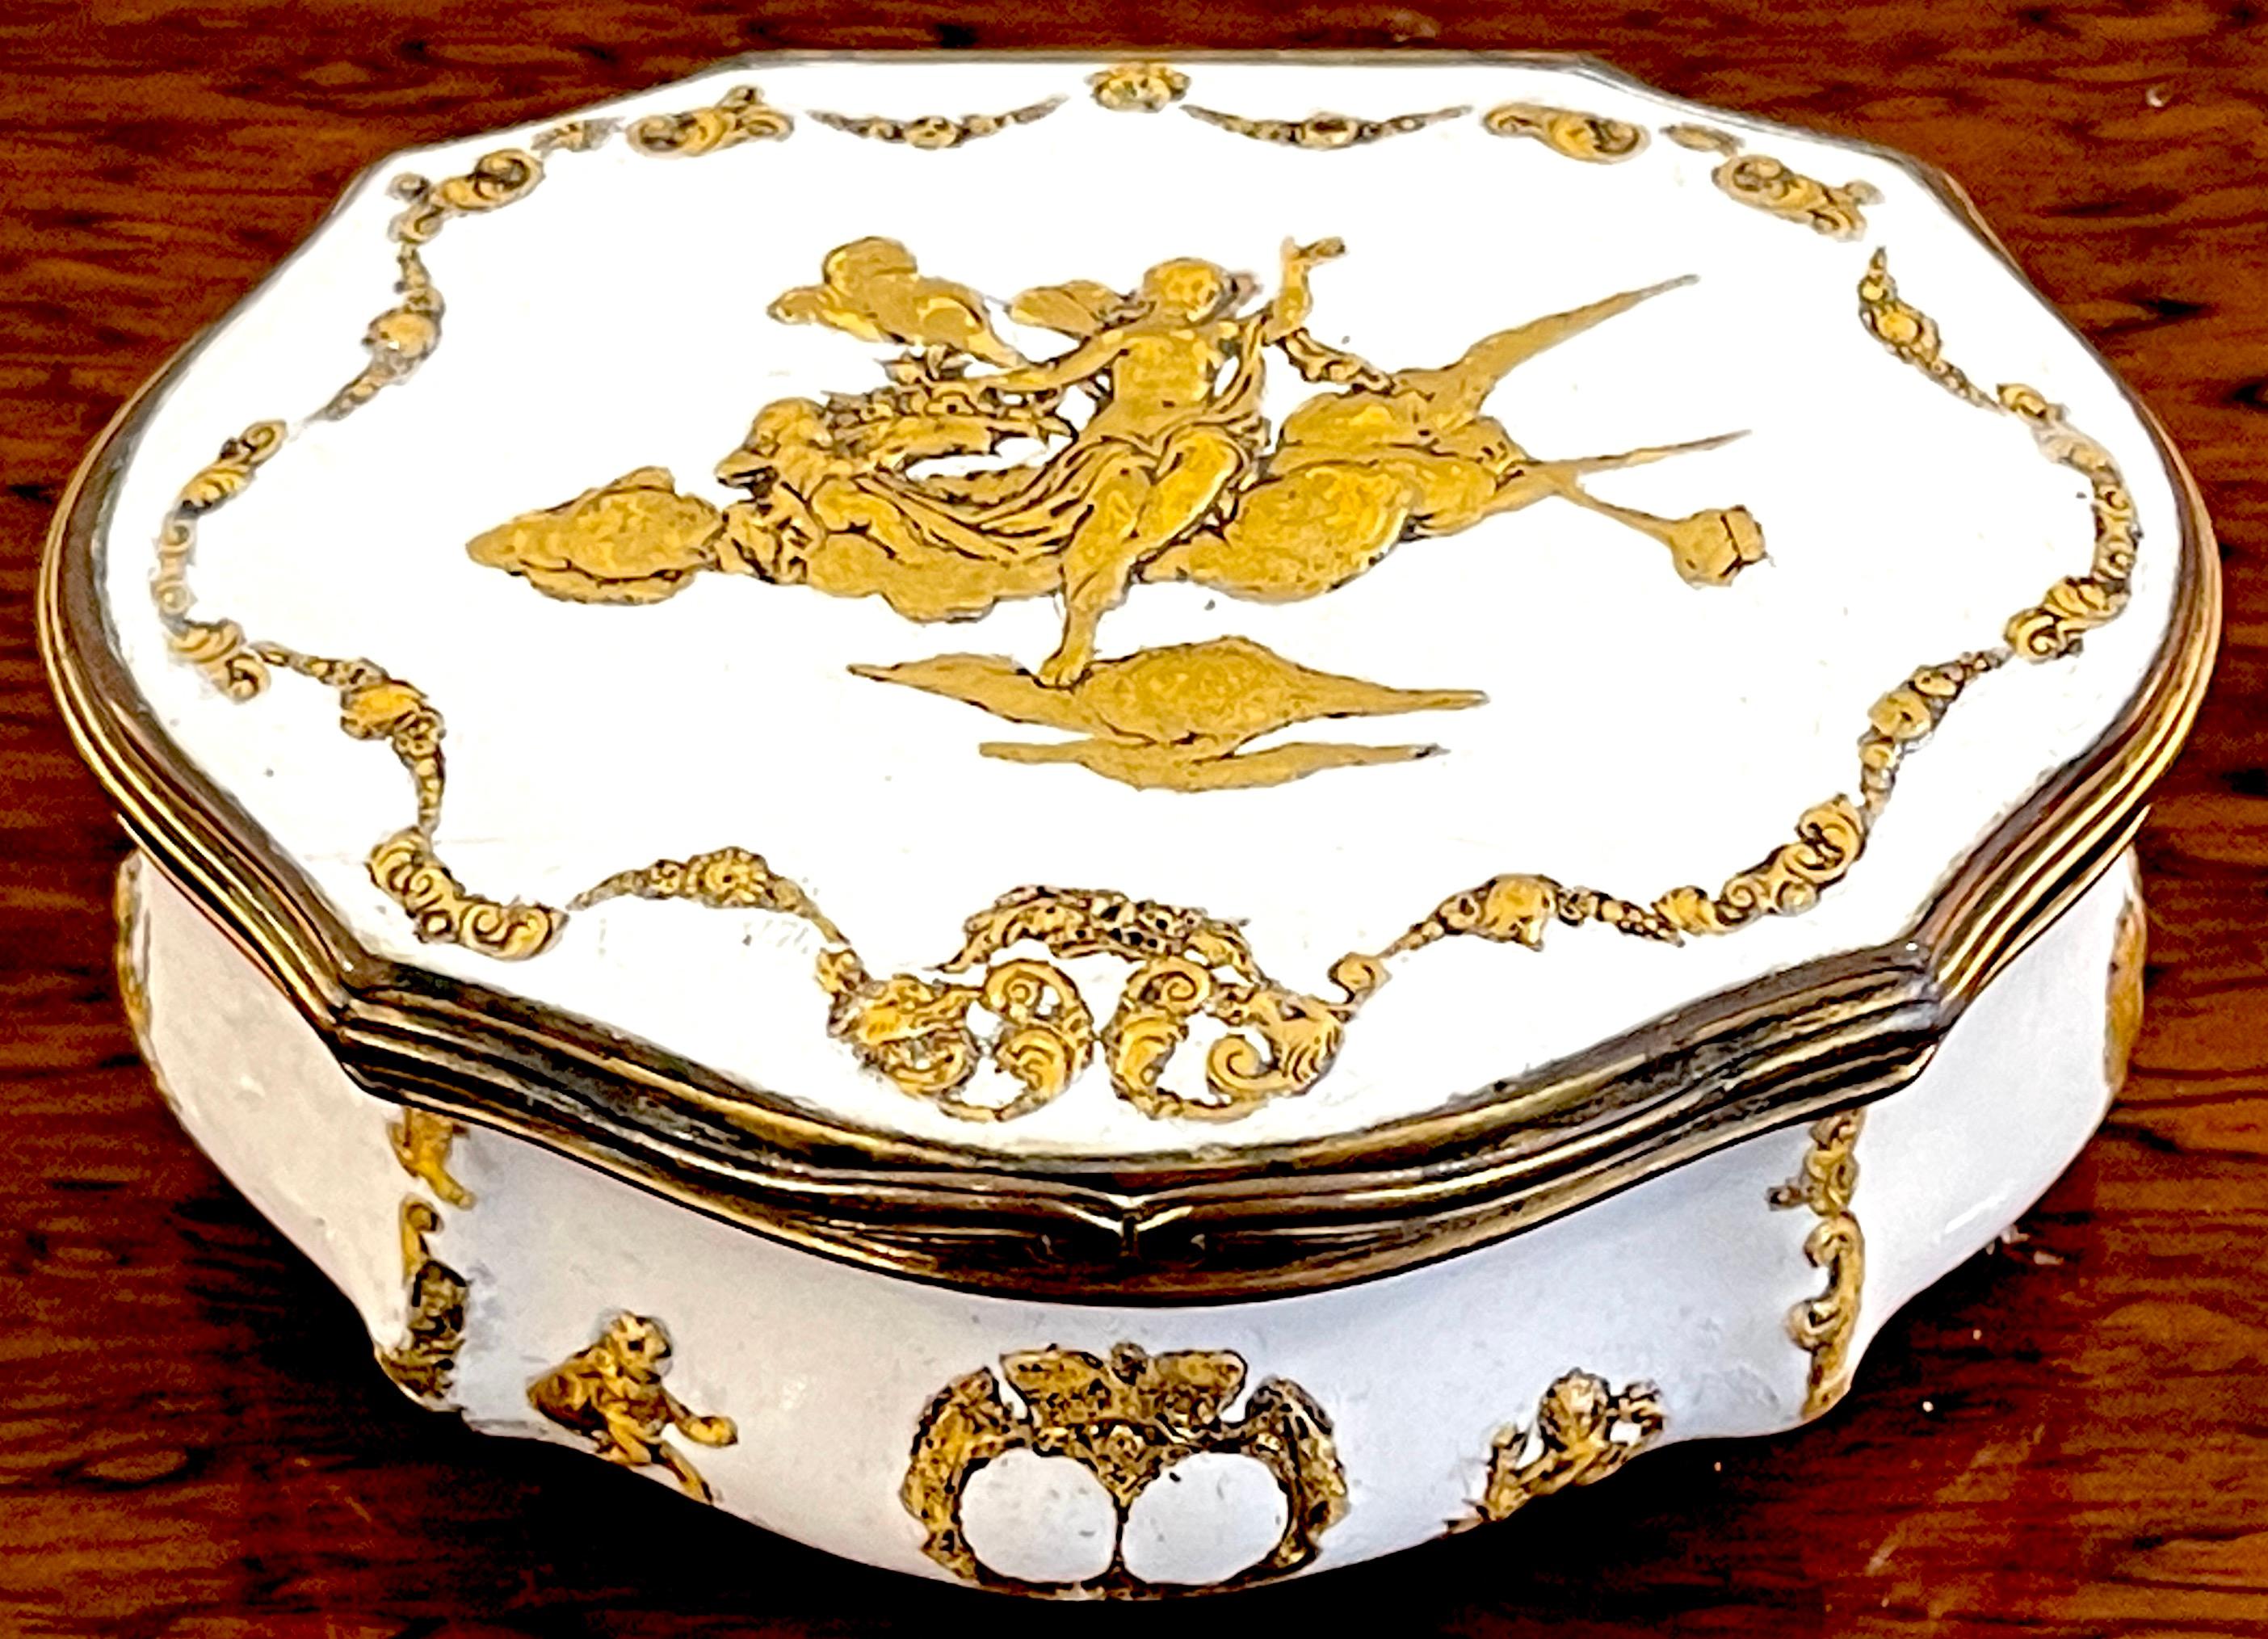 18th C Brass-Mounted Allegorical Motif Enamel Snuff Box,  Attributed to the Fromery Workshop
The Cartouche-shaped bombe box, the hinged lid applied with raised gilt enamel relief of allegorical figurers in landscape, the sides and base decorated